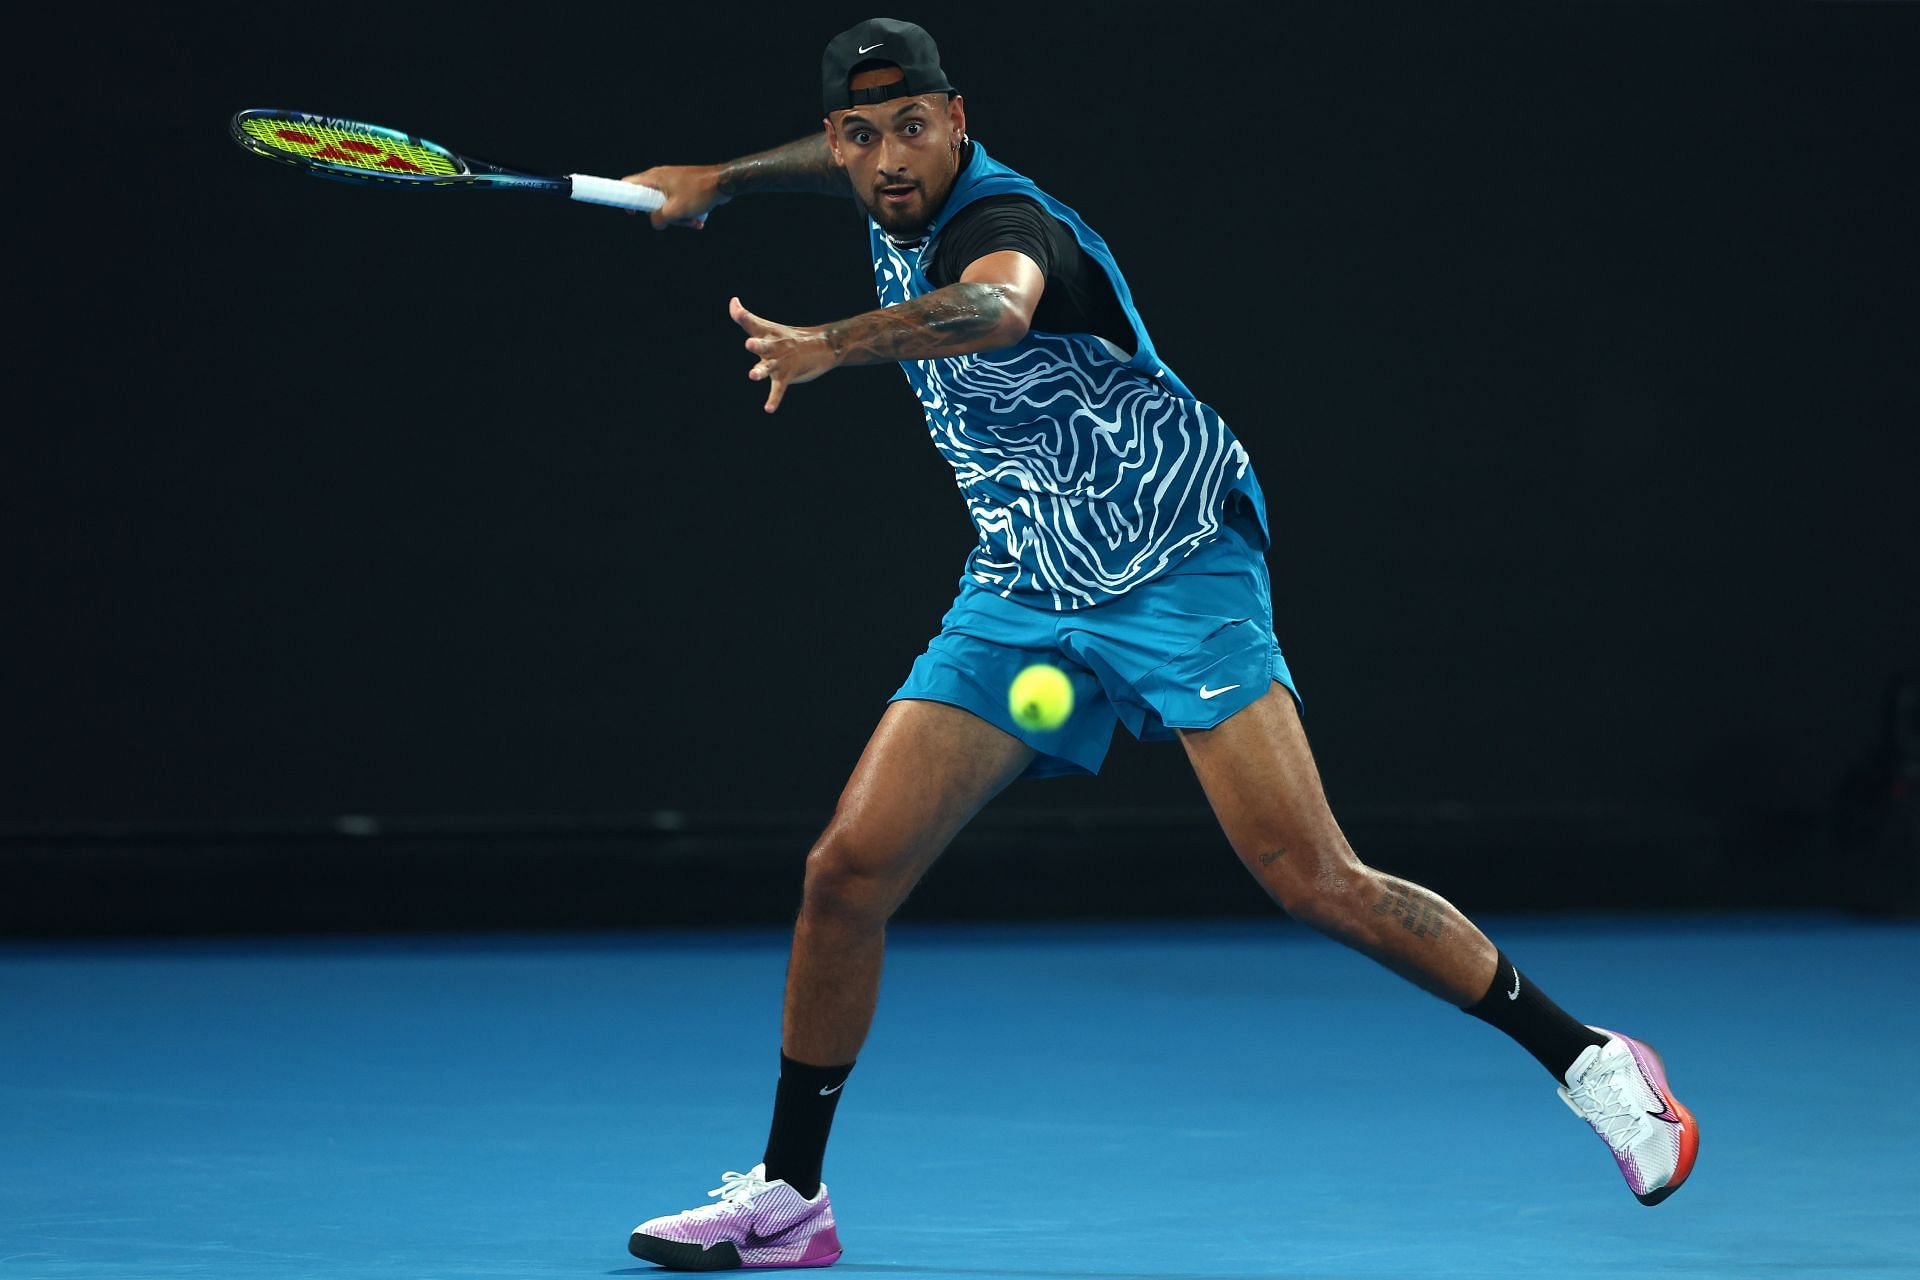 Nick Kyrgios competes in an exhibition event ahead of the 2023 Australian Open.